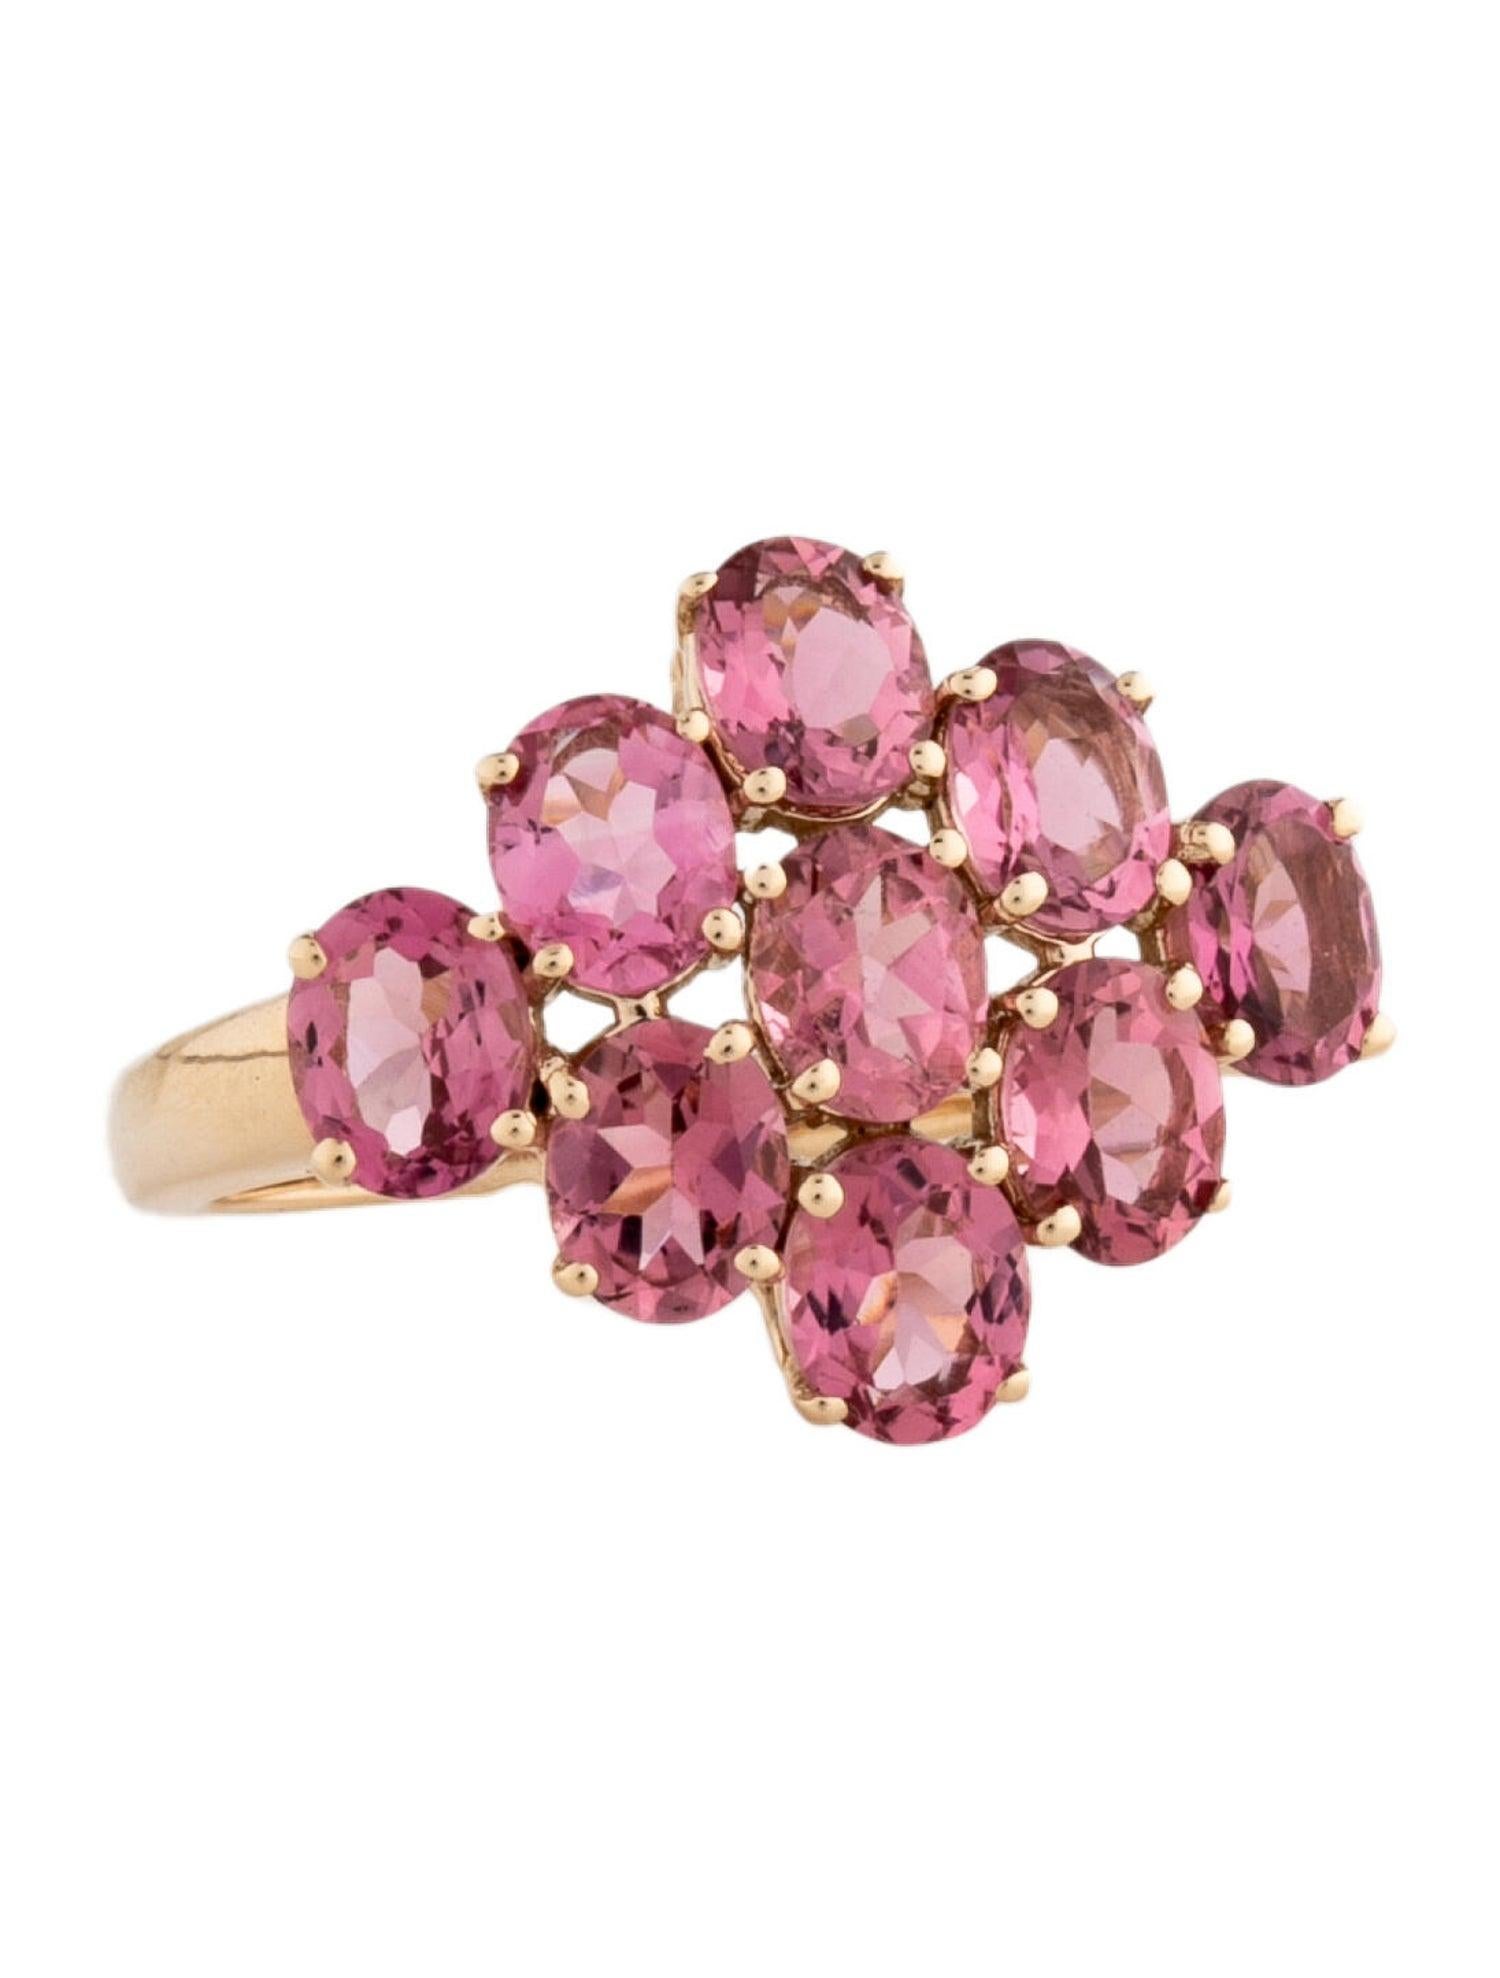 Immerse yourself in the mesmerizing world of our Rainbow Gemstone Radiance Collection with this exquisite Pink Tourmaline Ring. Inspired by the vibrant tapestry of a lush forest, each piece in this collection celebrates the kaleidoscope of colors